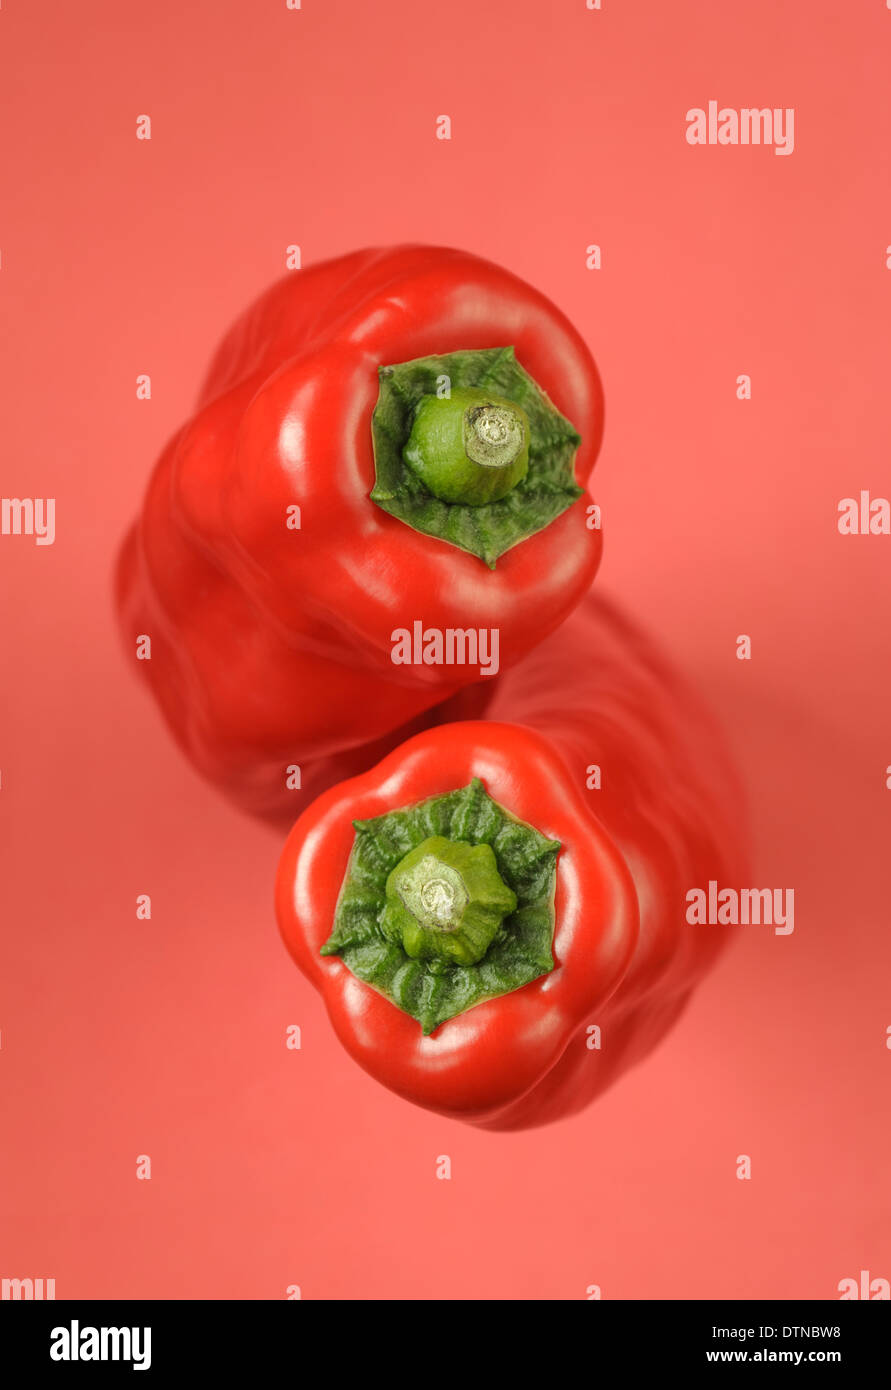 Two red peppers on red background Stock Photo